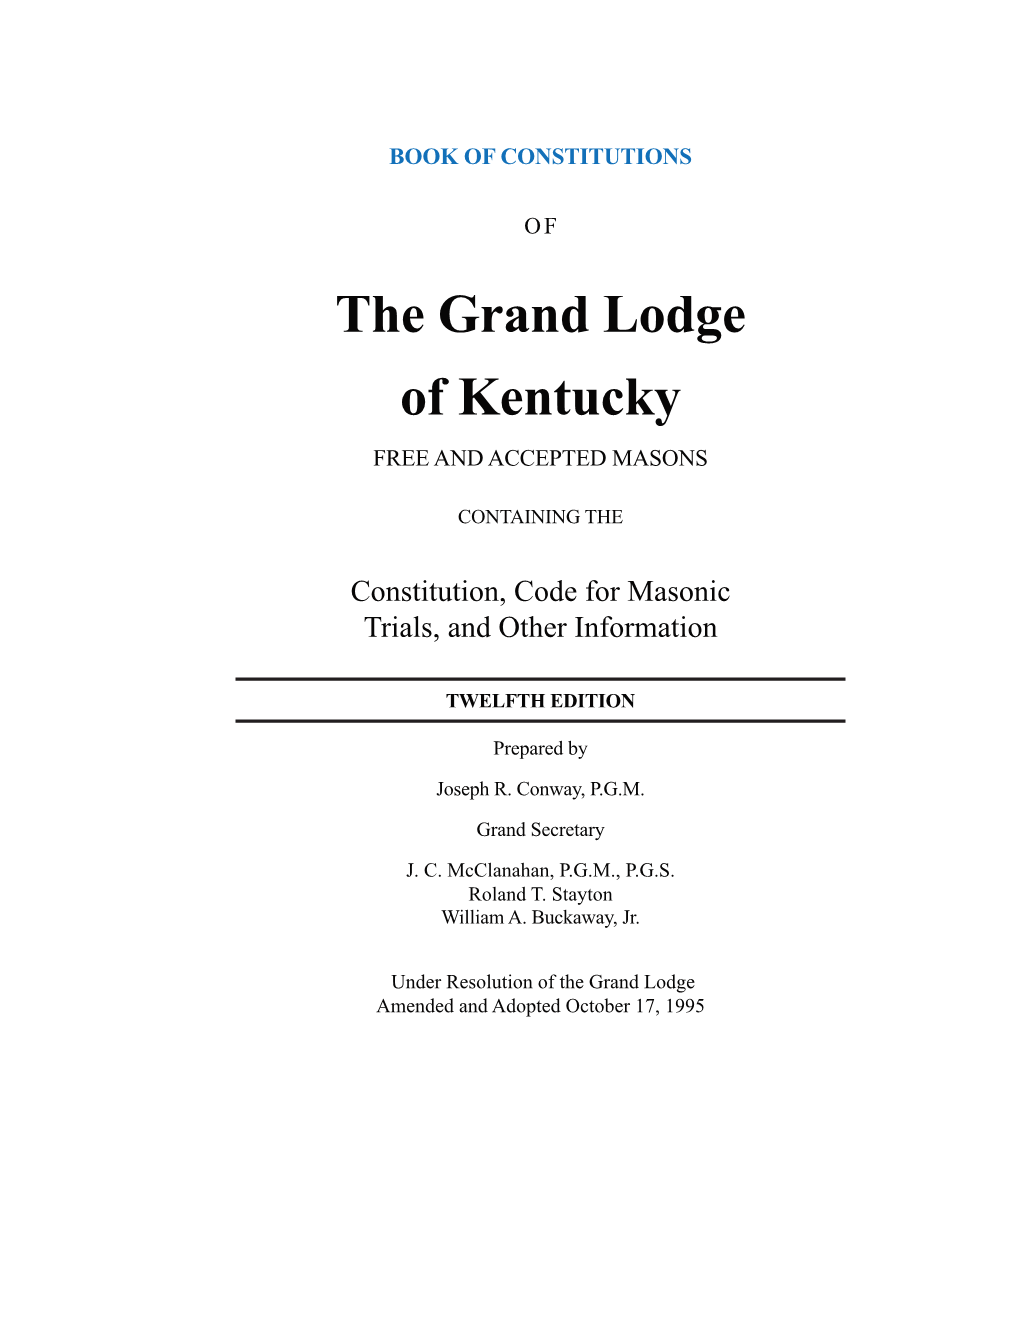 Amended Articles of Incorporation of “The Grand Lodge of Kentucky”